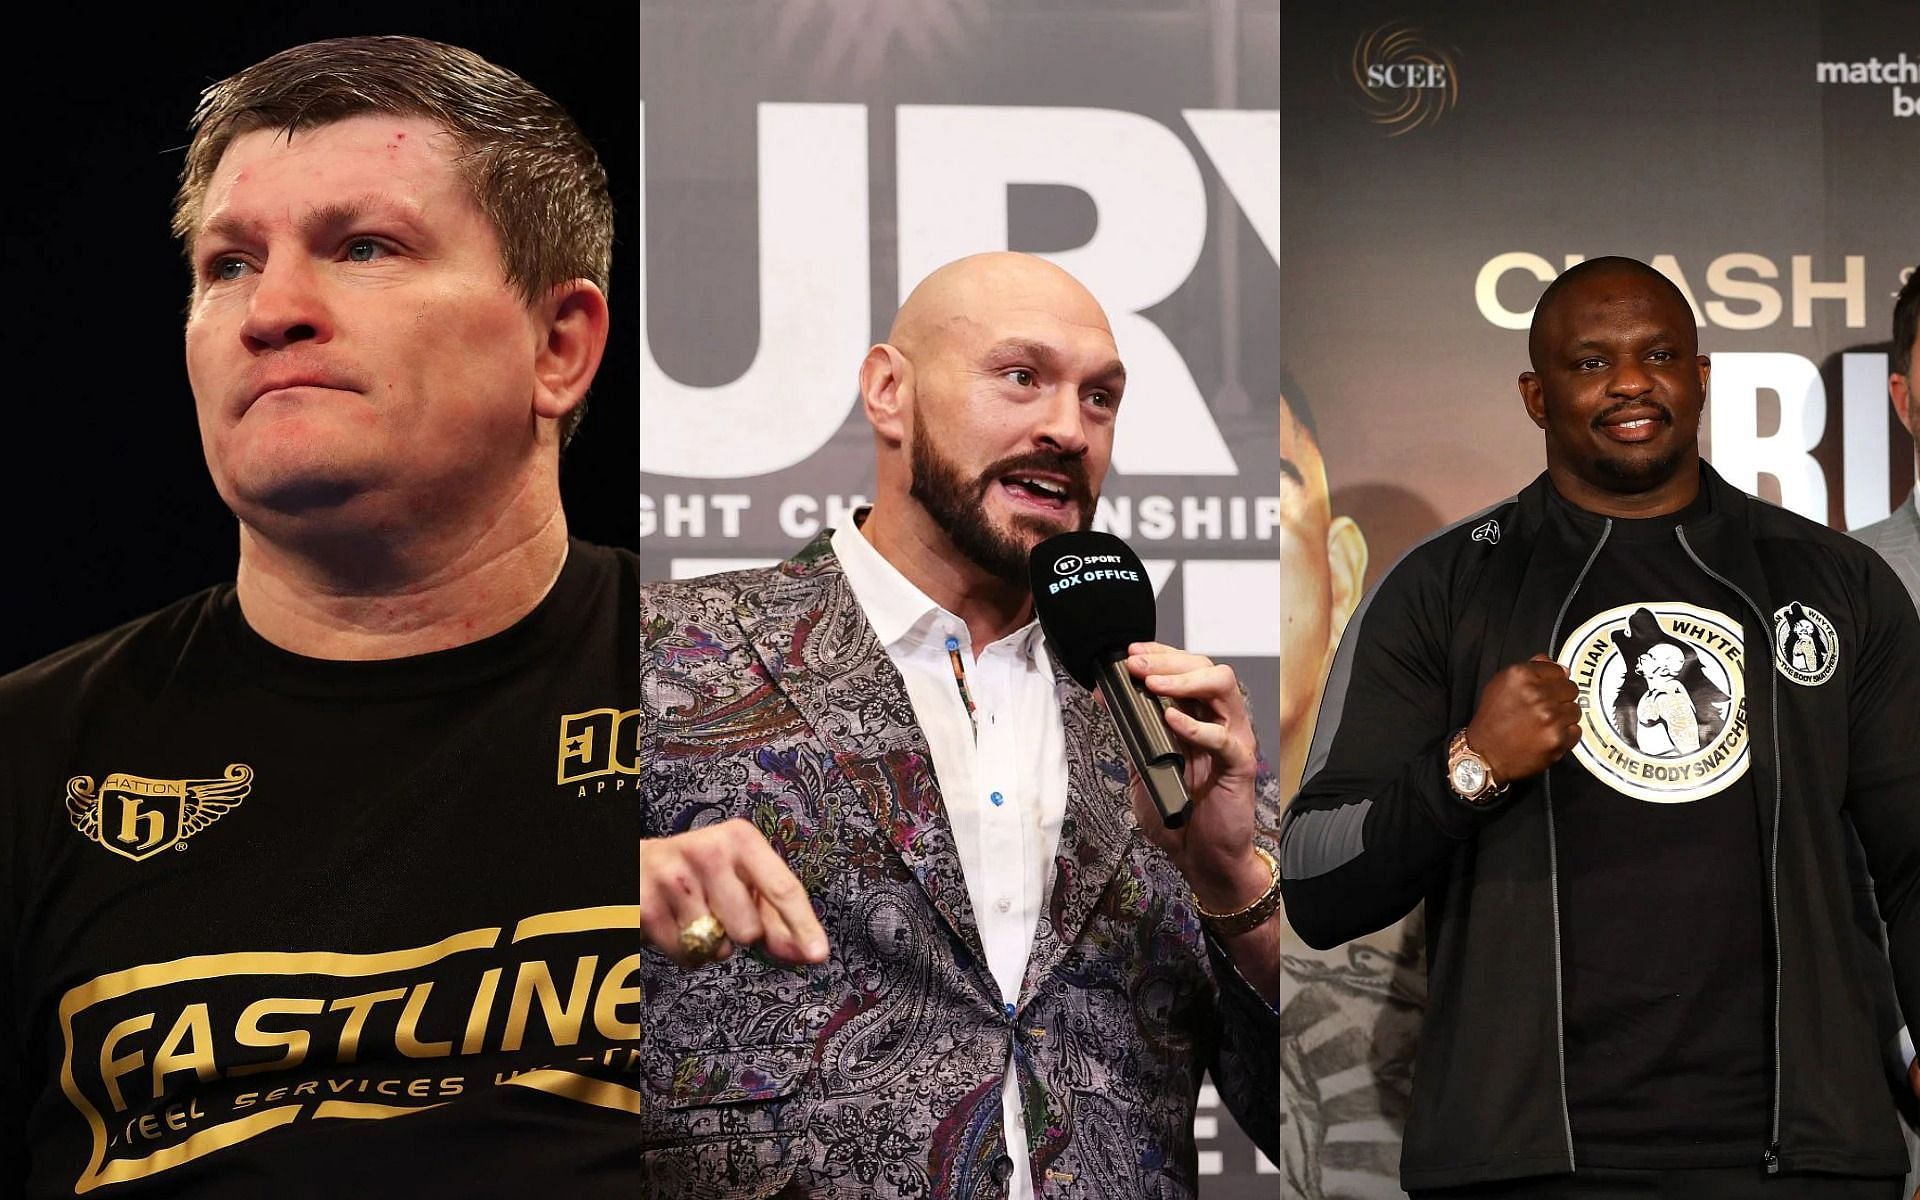 Ricky Hatton (L) has given his thoughts on the upcoming Tyson Fury (L) vs. Dillian Whyte (R) bout.